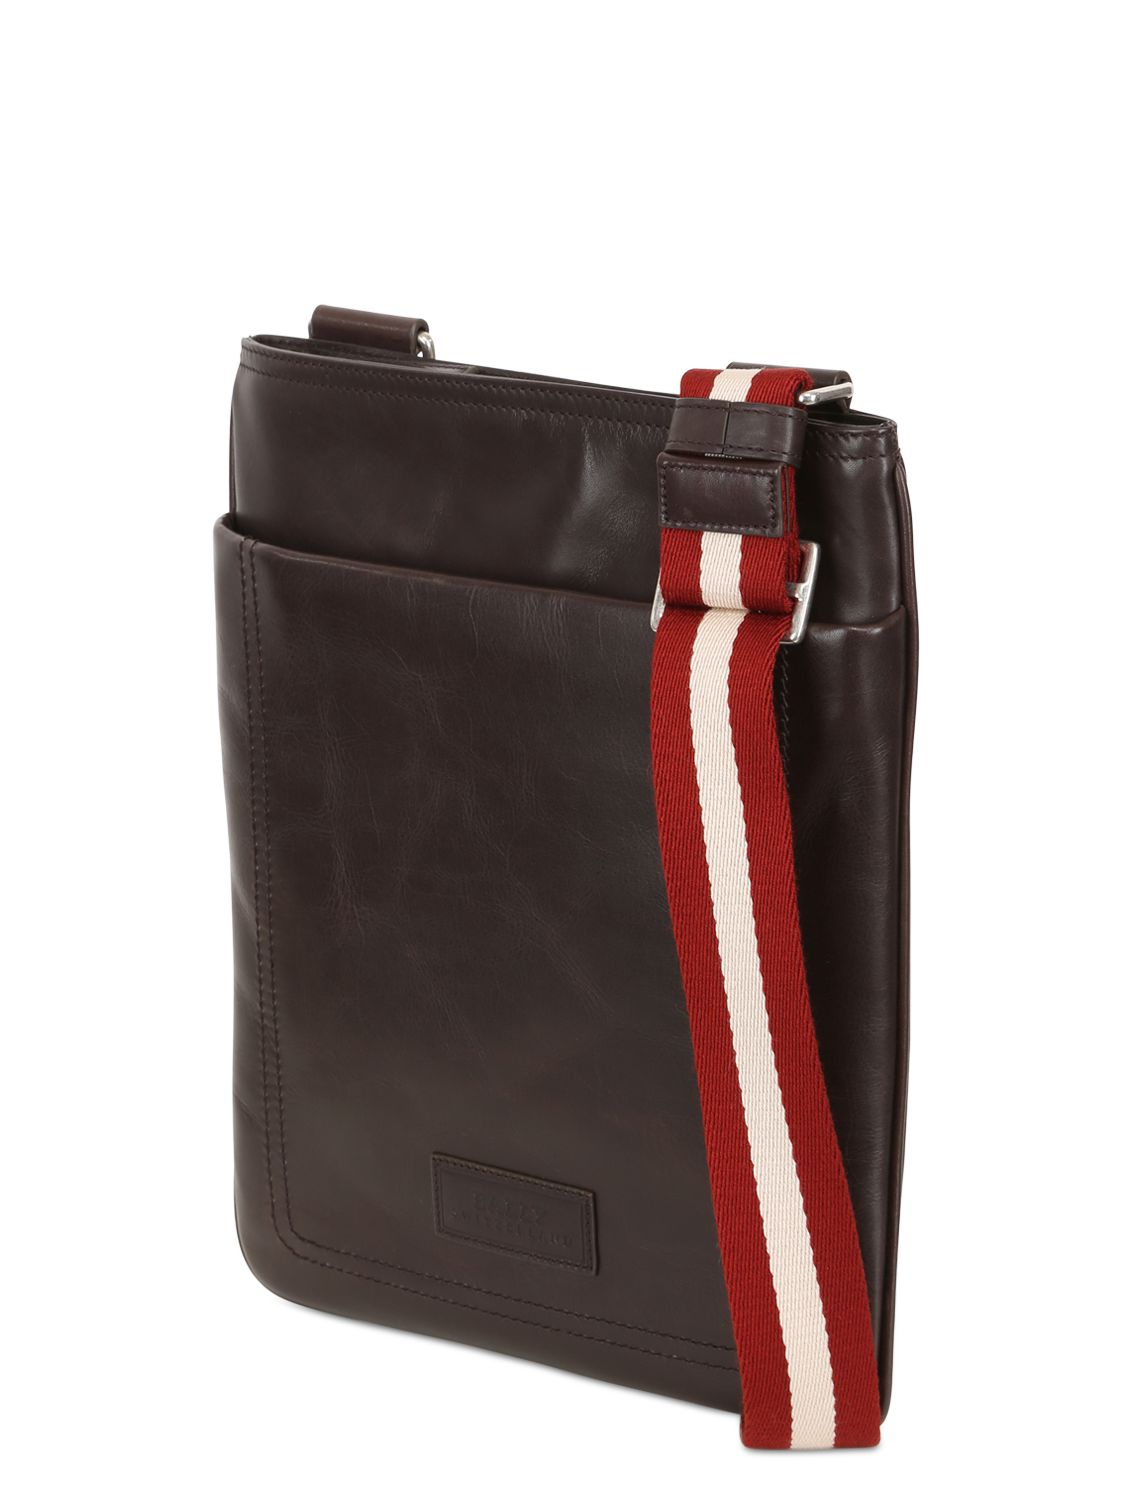 Bally Leather Crossbody Bag in Brown for Men - Lyst